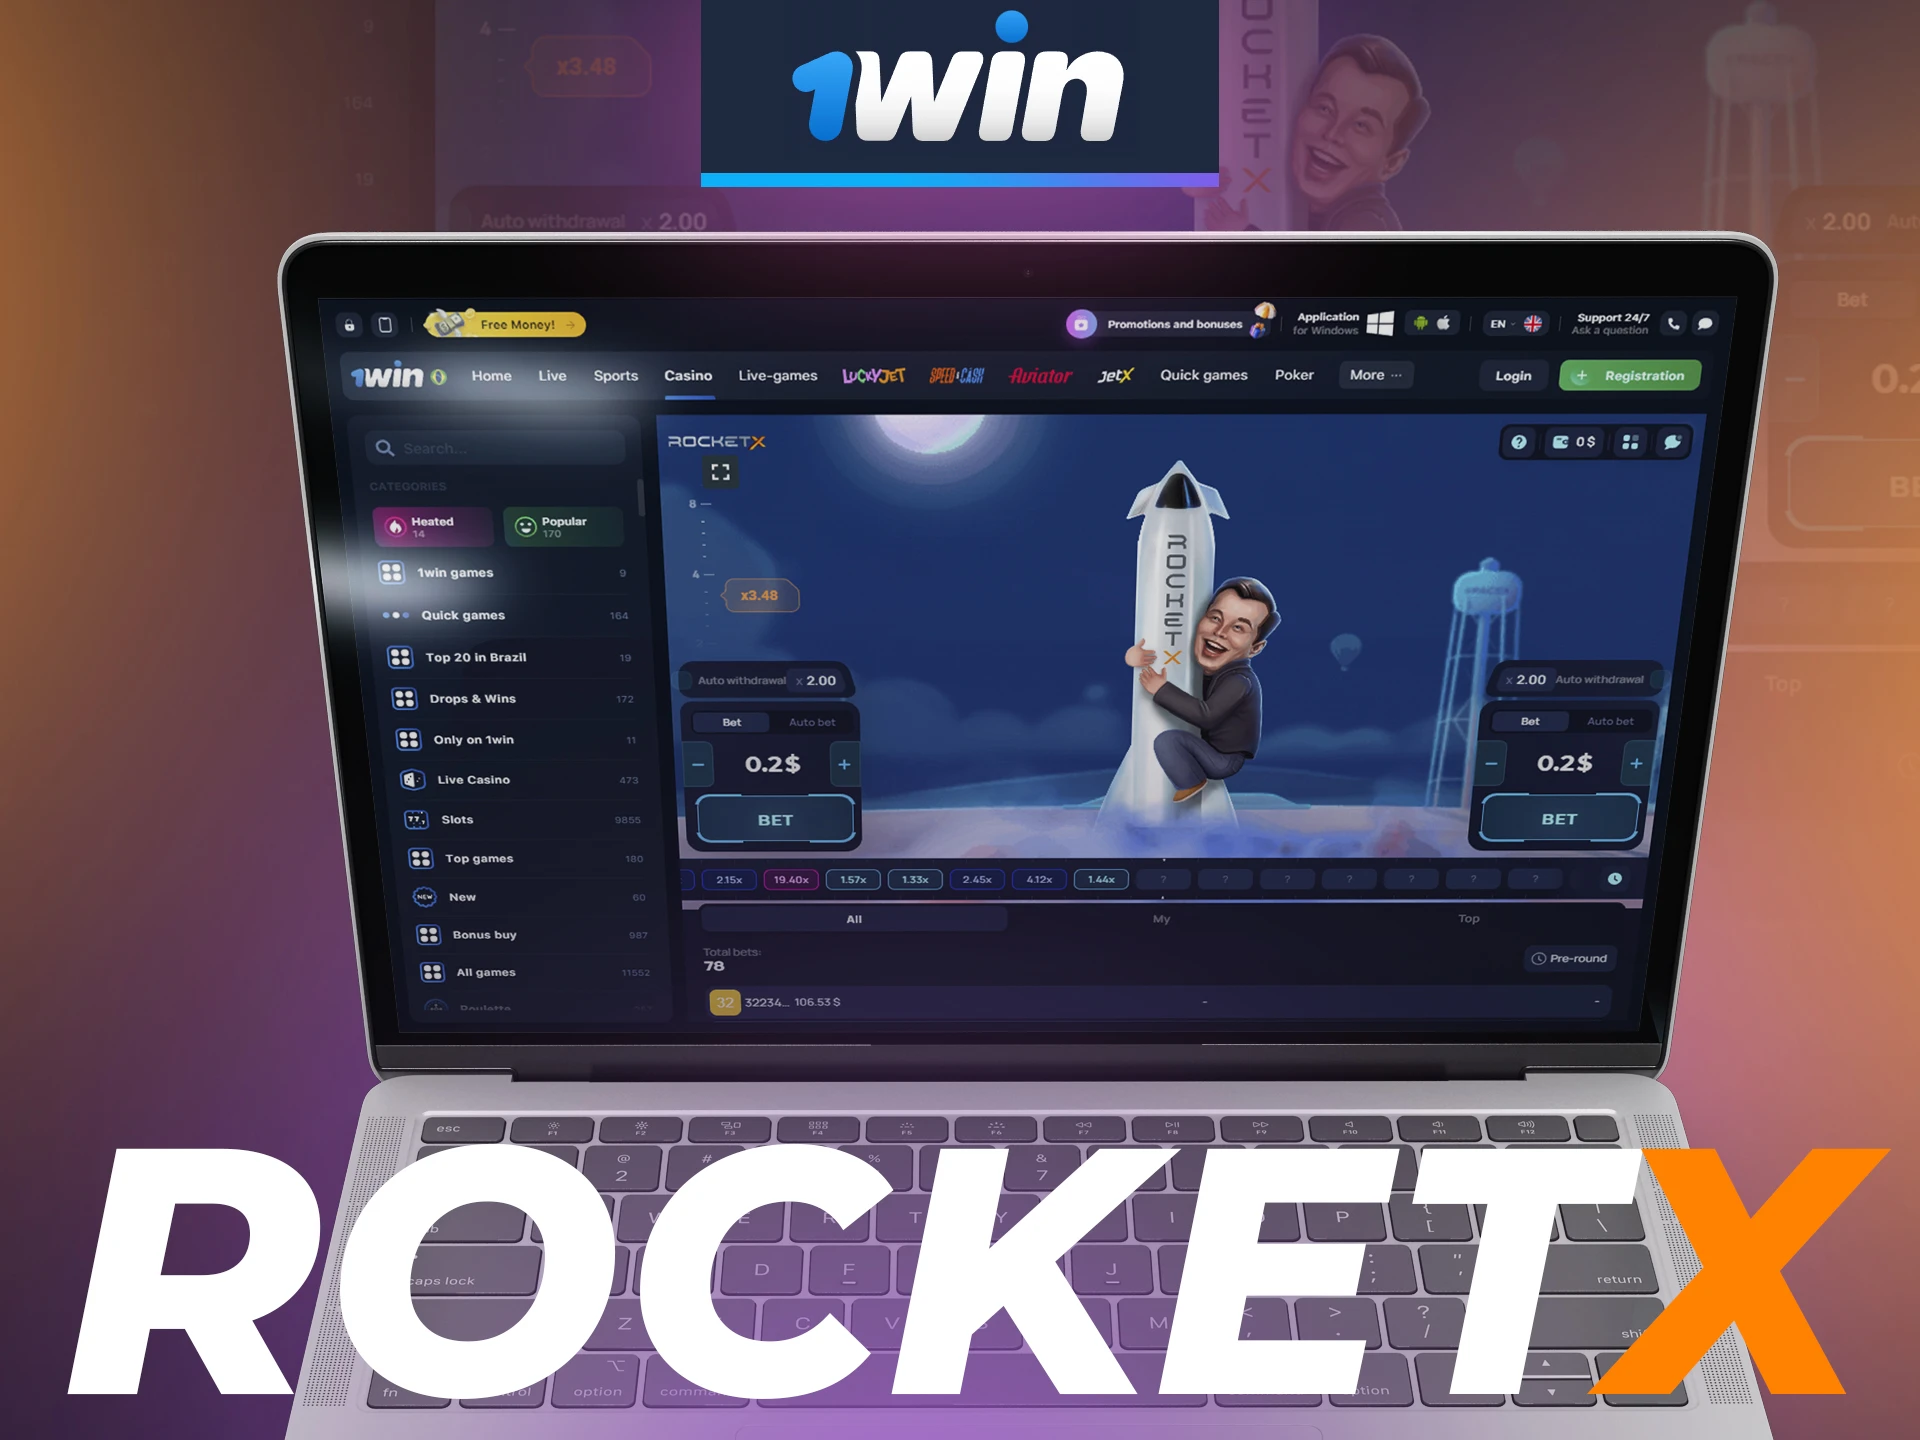 At 1win, try your luck at Rocket X.